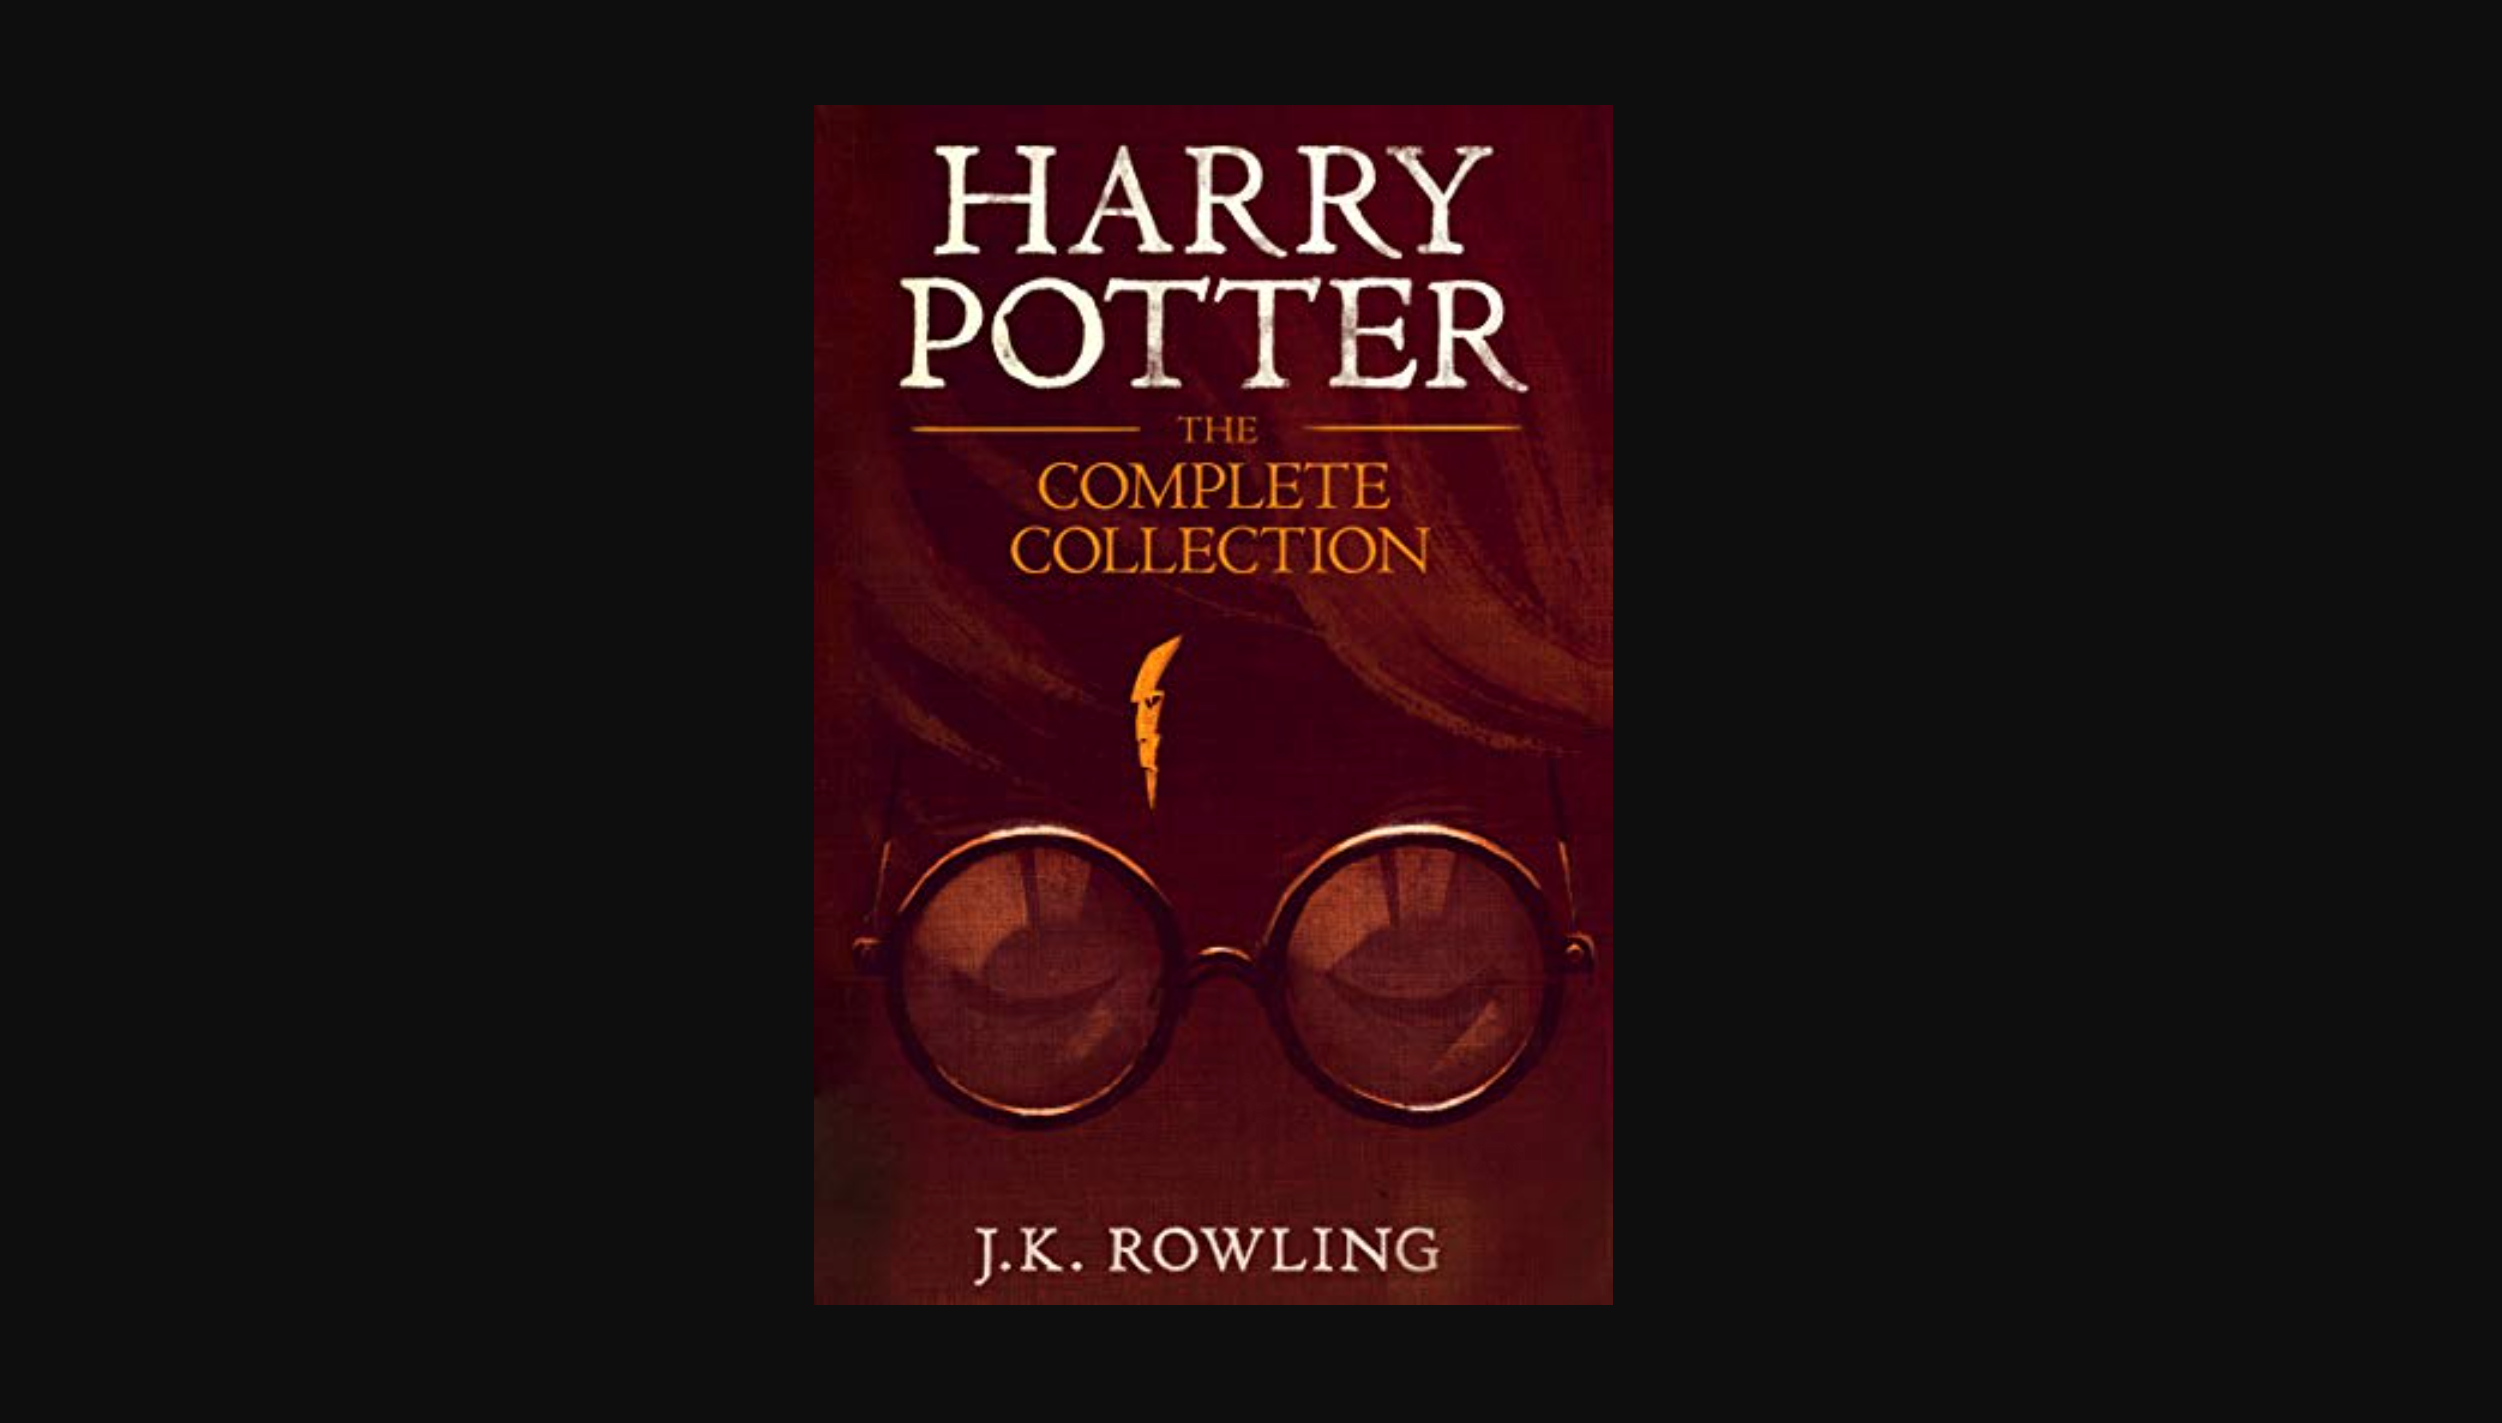 Can I read the Harry Potter books on a PC? 2